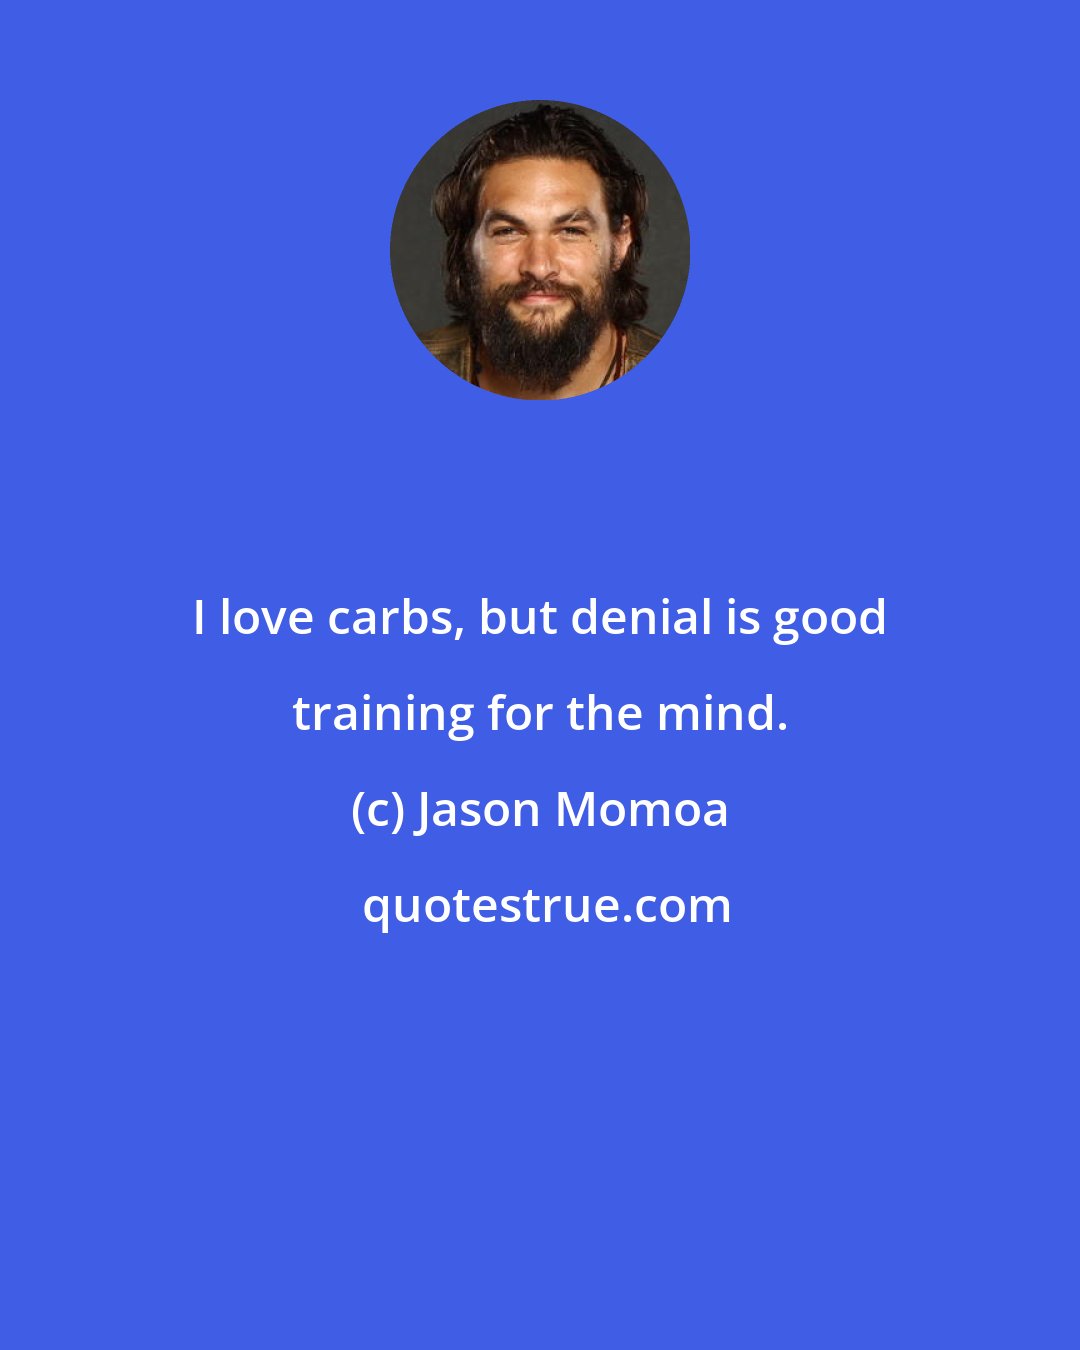 Jason Momoa: I love carbs, but denial is good training for the mind.